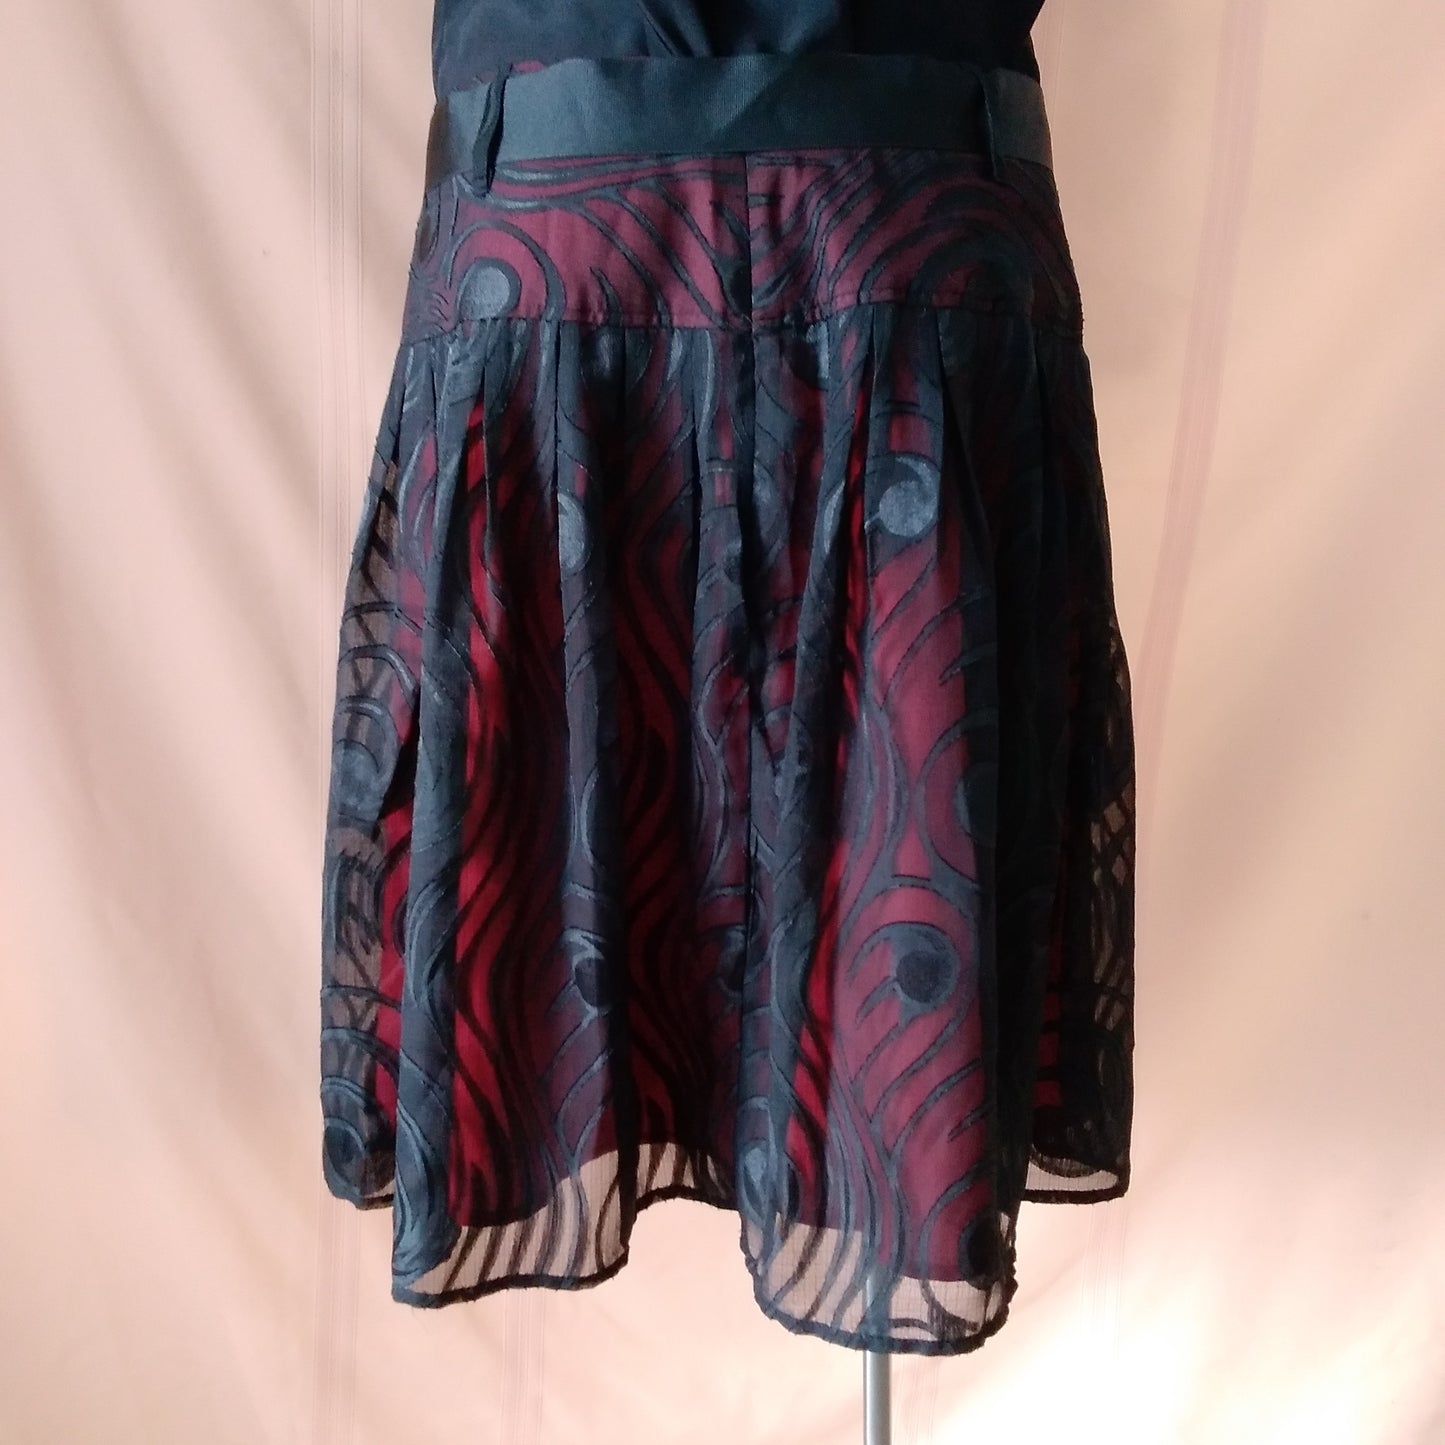 Worthington Black with Red Lining Belted Lace Skirt - 16